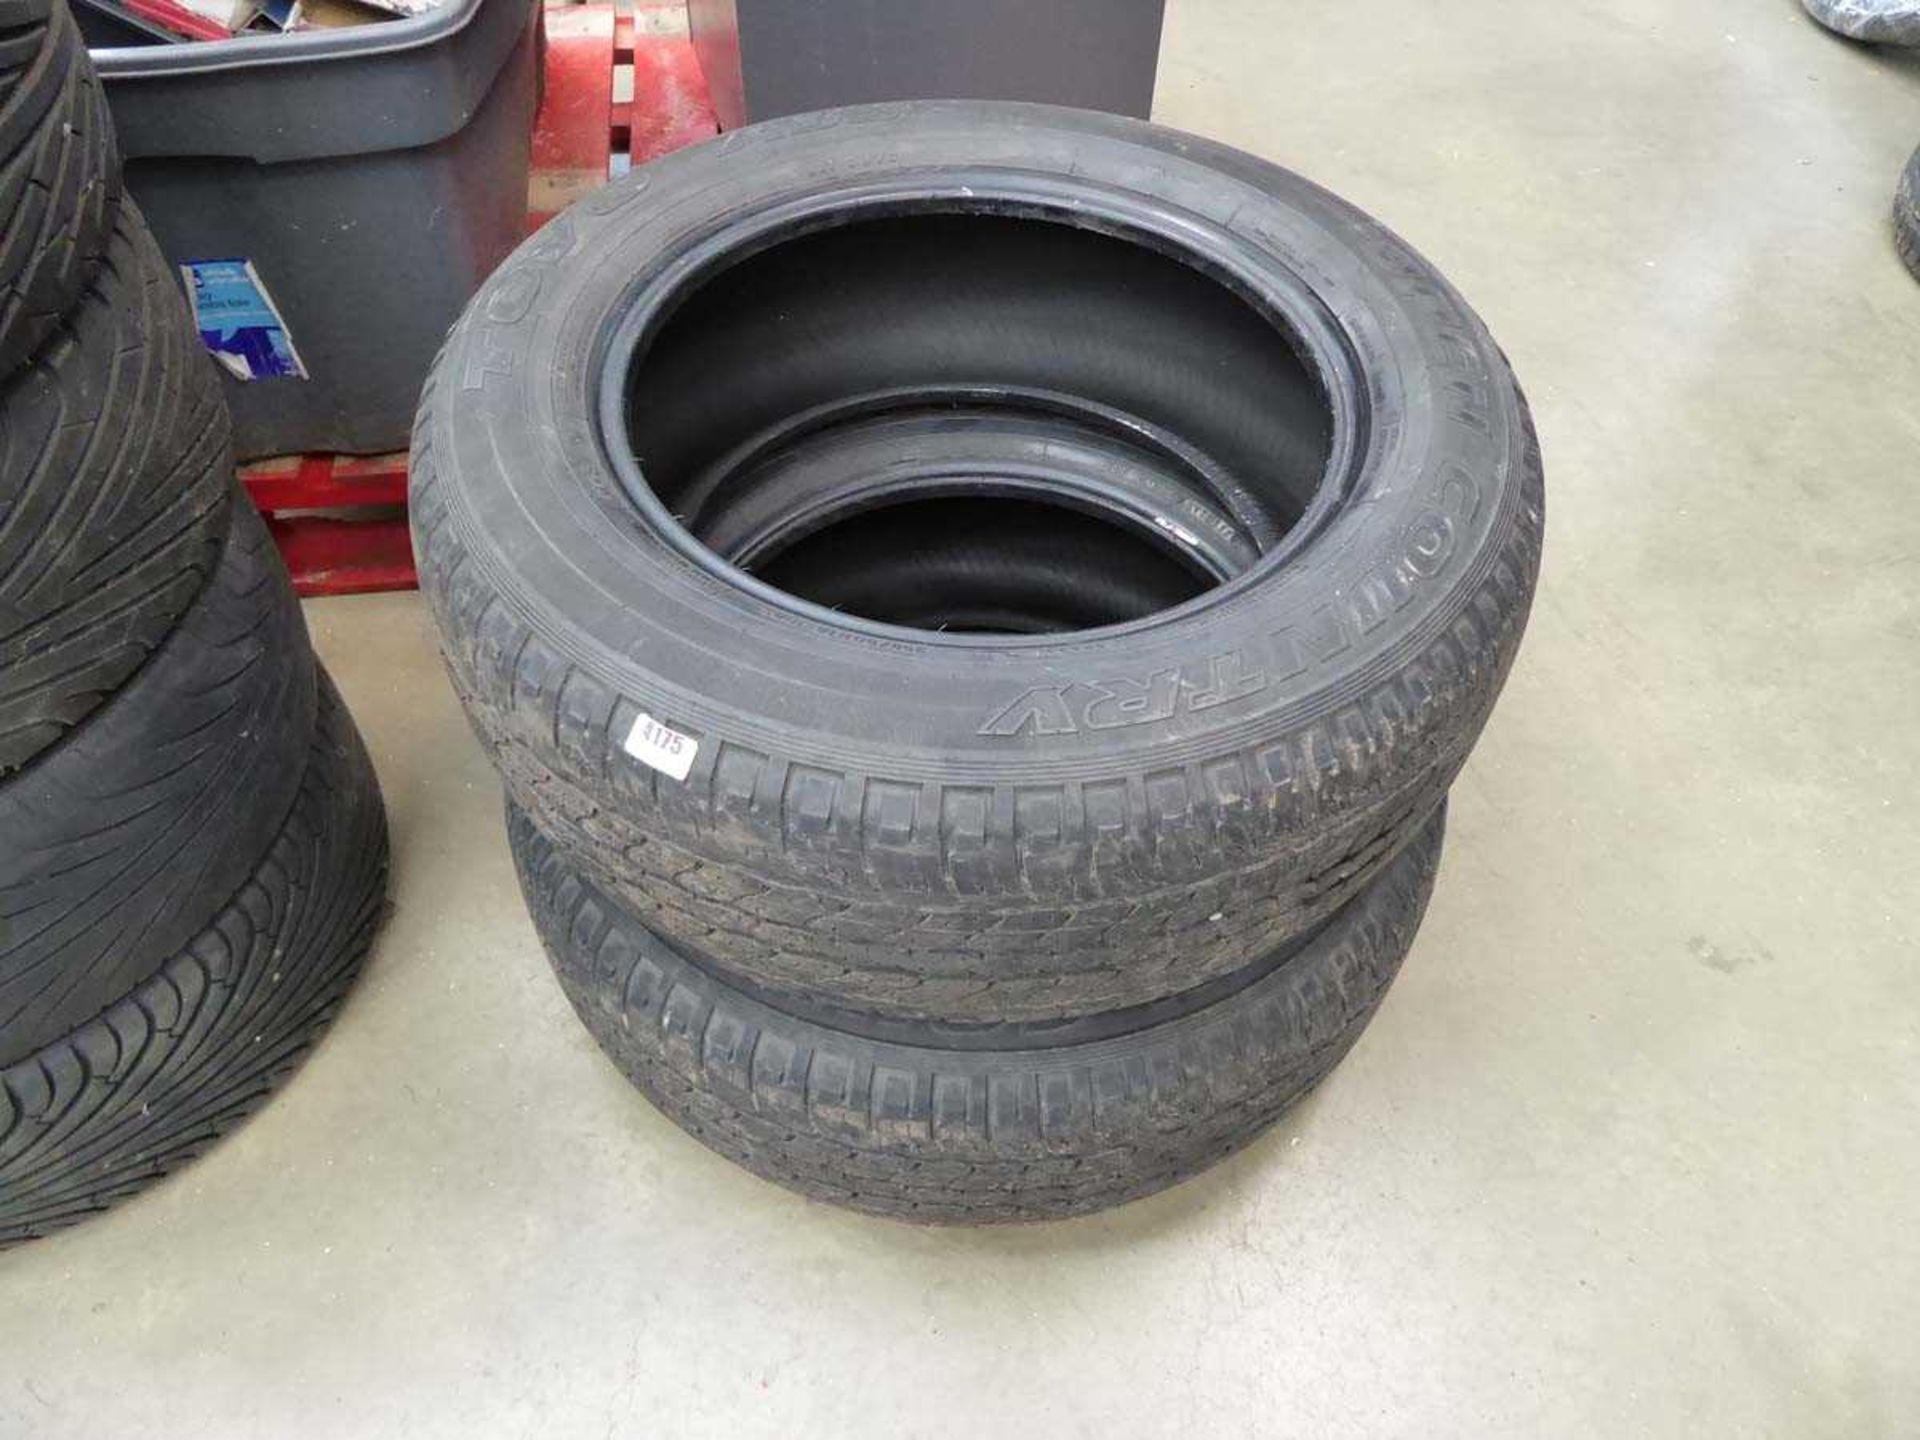 2 x Toyo A33 Open Country tyres size 255x 60x18